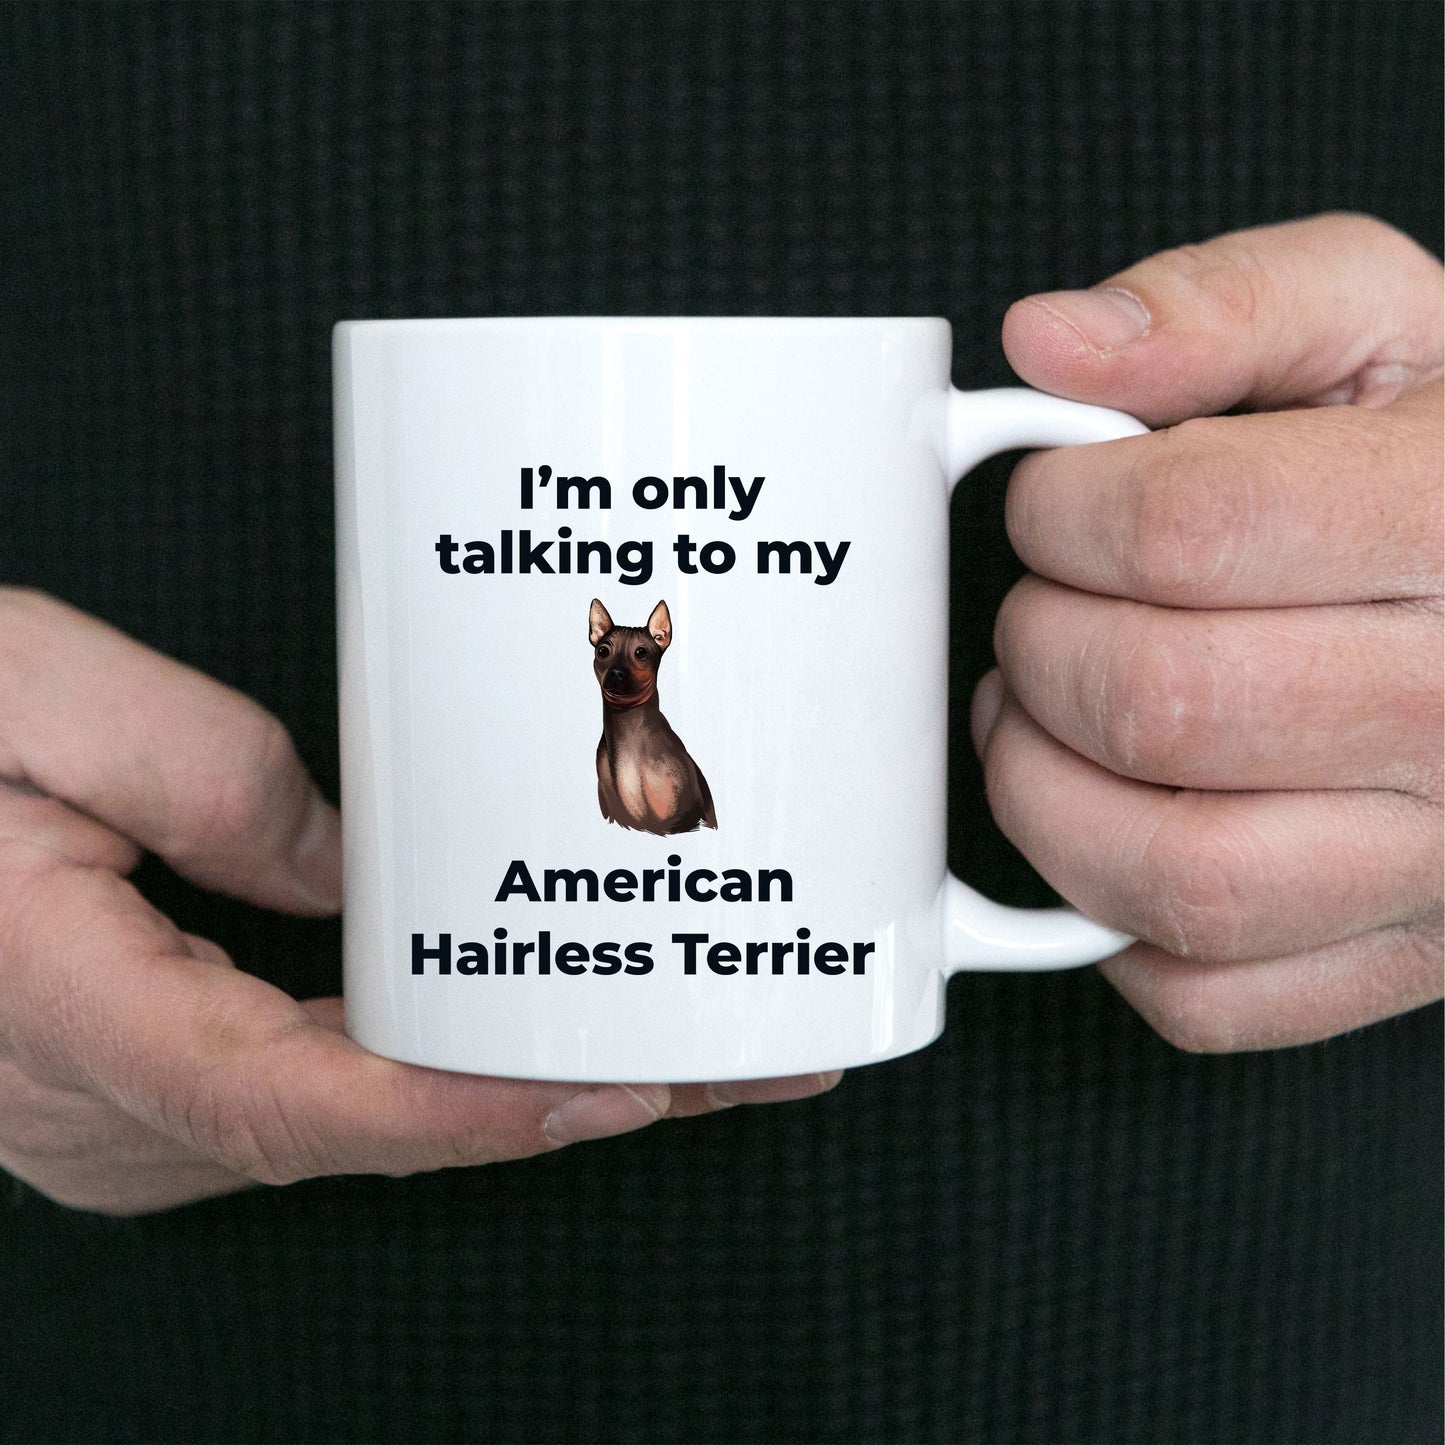 American Hairless Terrier Coffee Mug - I'm only talking to my American Hairless Terrier